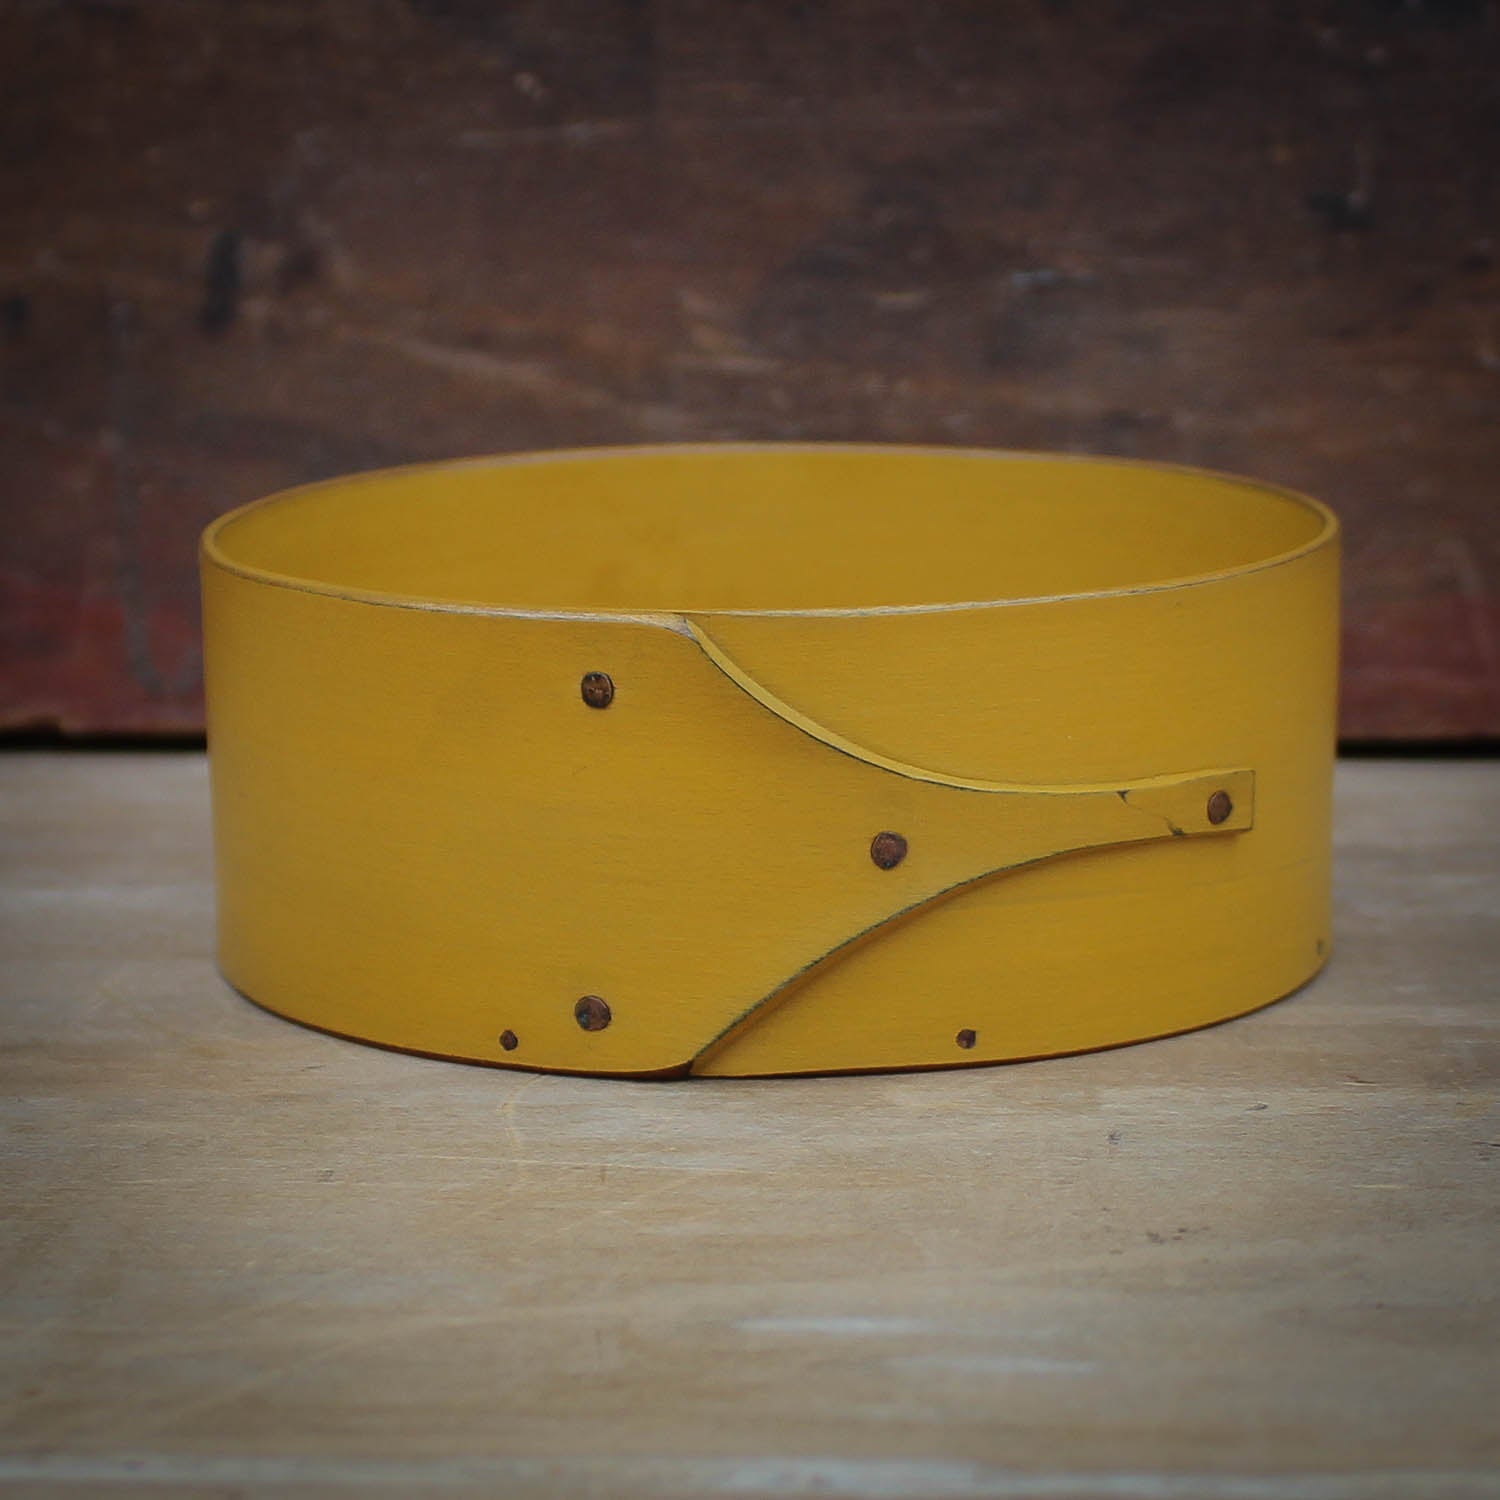 Shaker Style Pin Cushion Base for Needlework, LeHays Shaker Boxes, Handcrafted in Maine, Yellow Milk Paint Finish